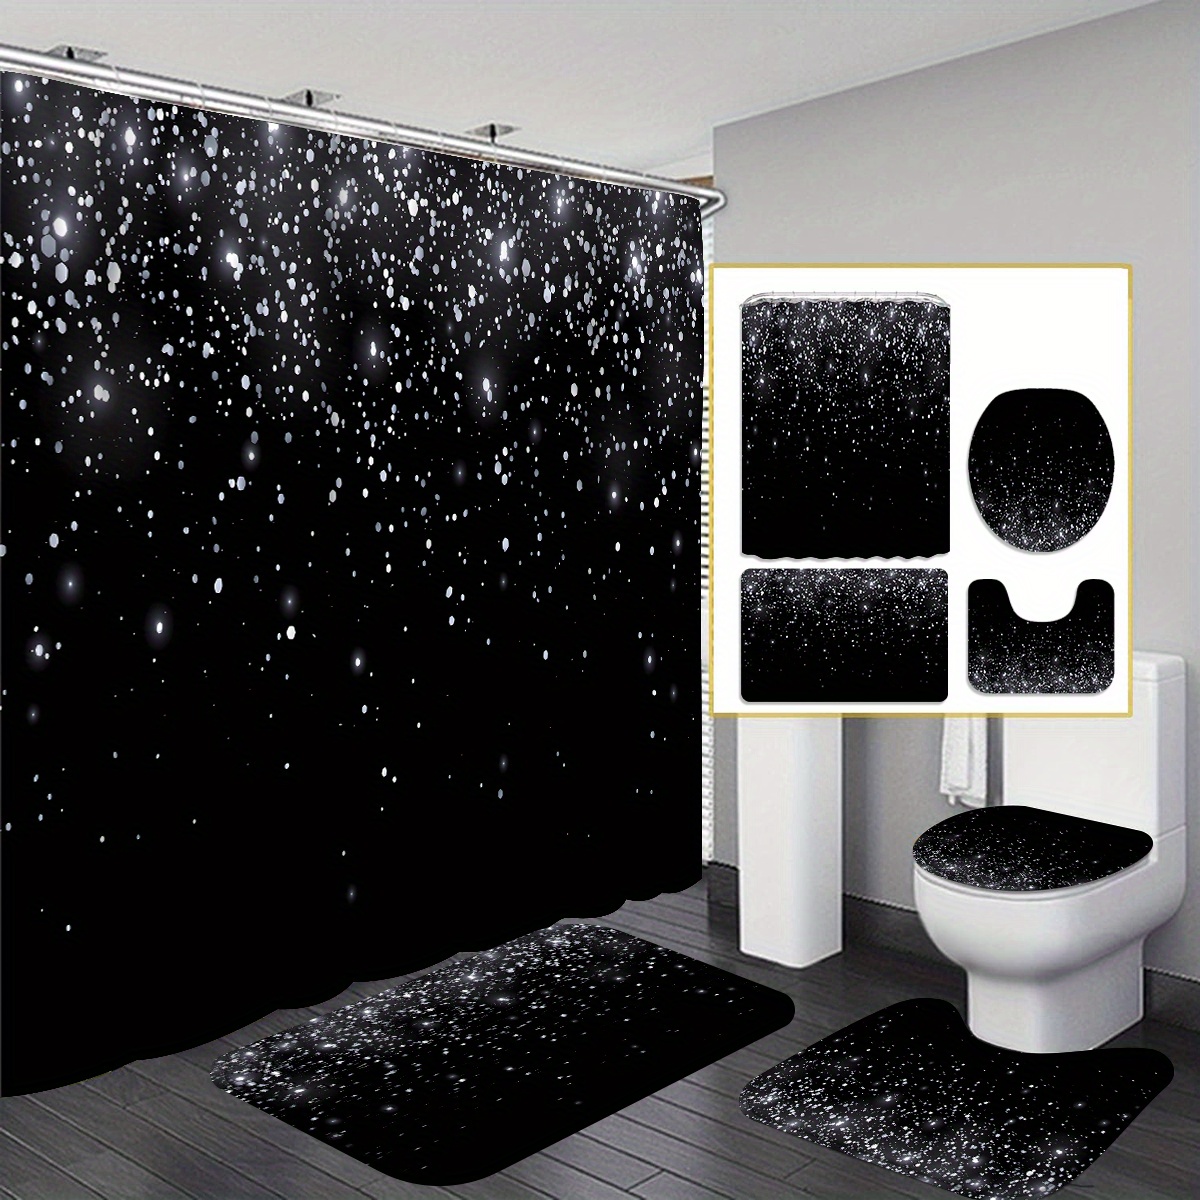 

4pcs Black Starlight Shower Curtain Gift Modern Home Bathroom Decoration Curtain And Toilet Floor Mat 3-piece Set With 12 Shower Curtain Hooks